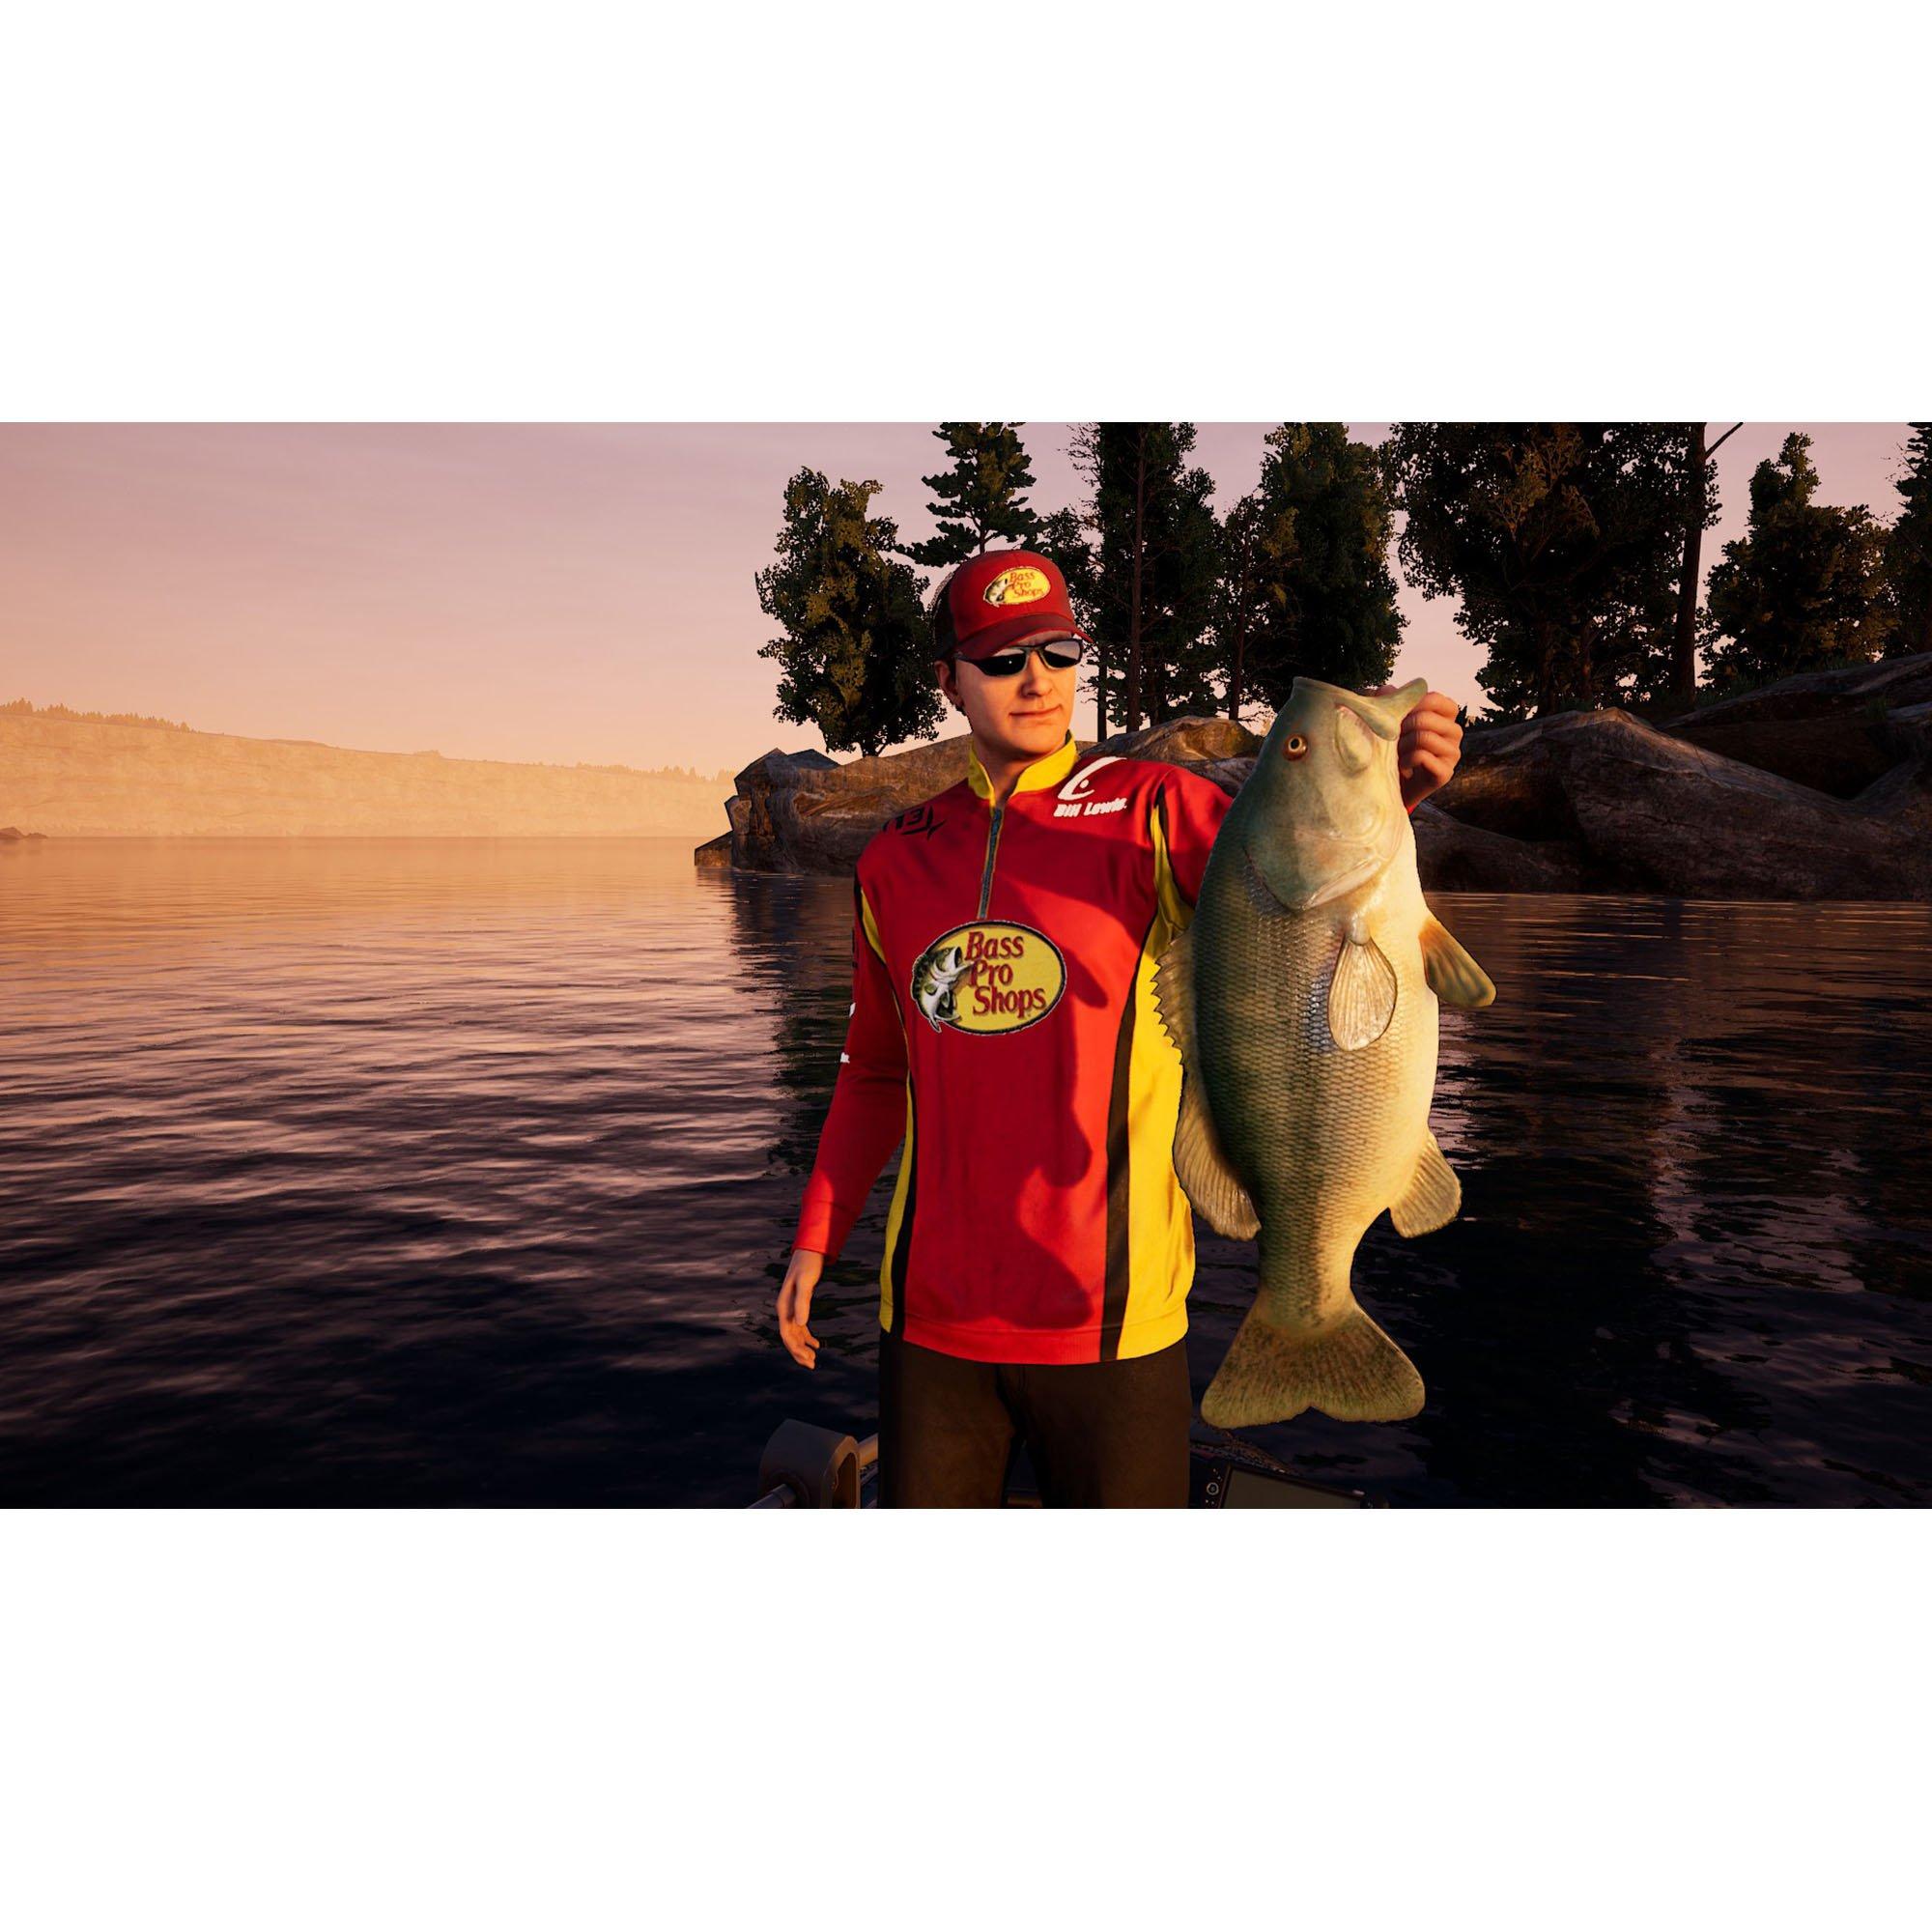 Up To Scale achievement in Fishing Sim World: Bass Pro Shops Edition